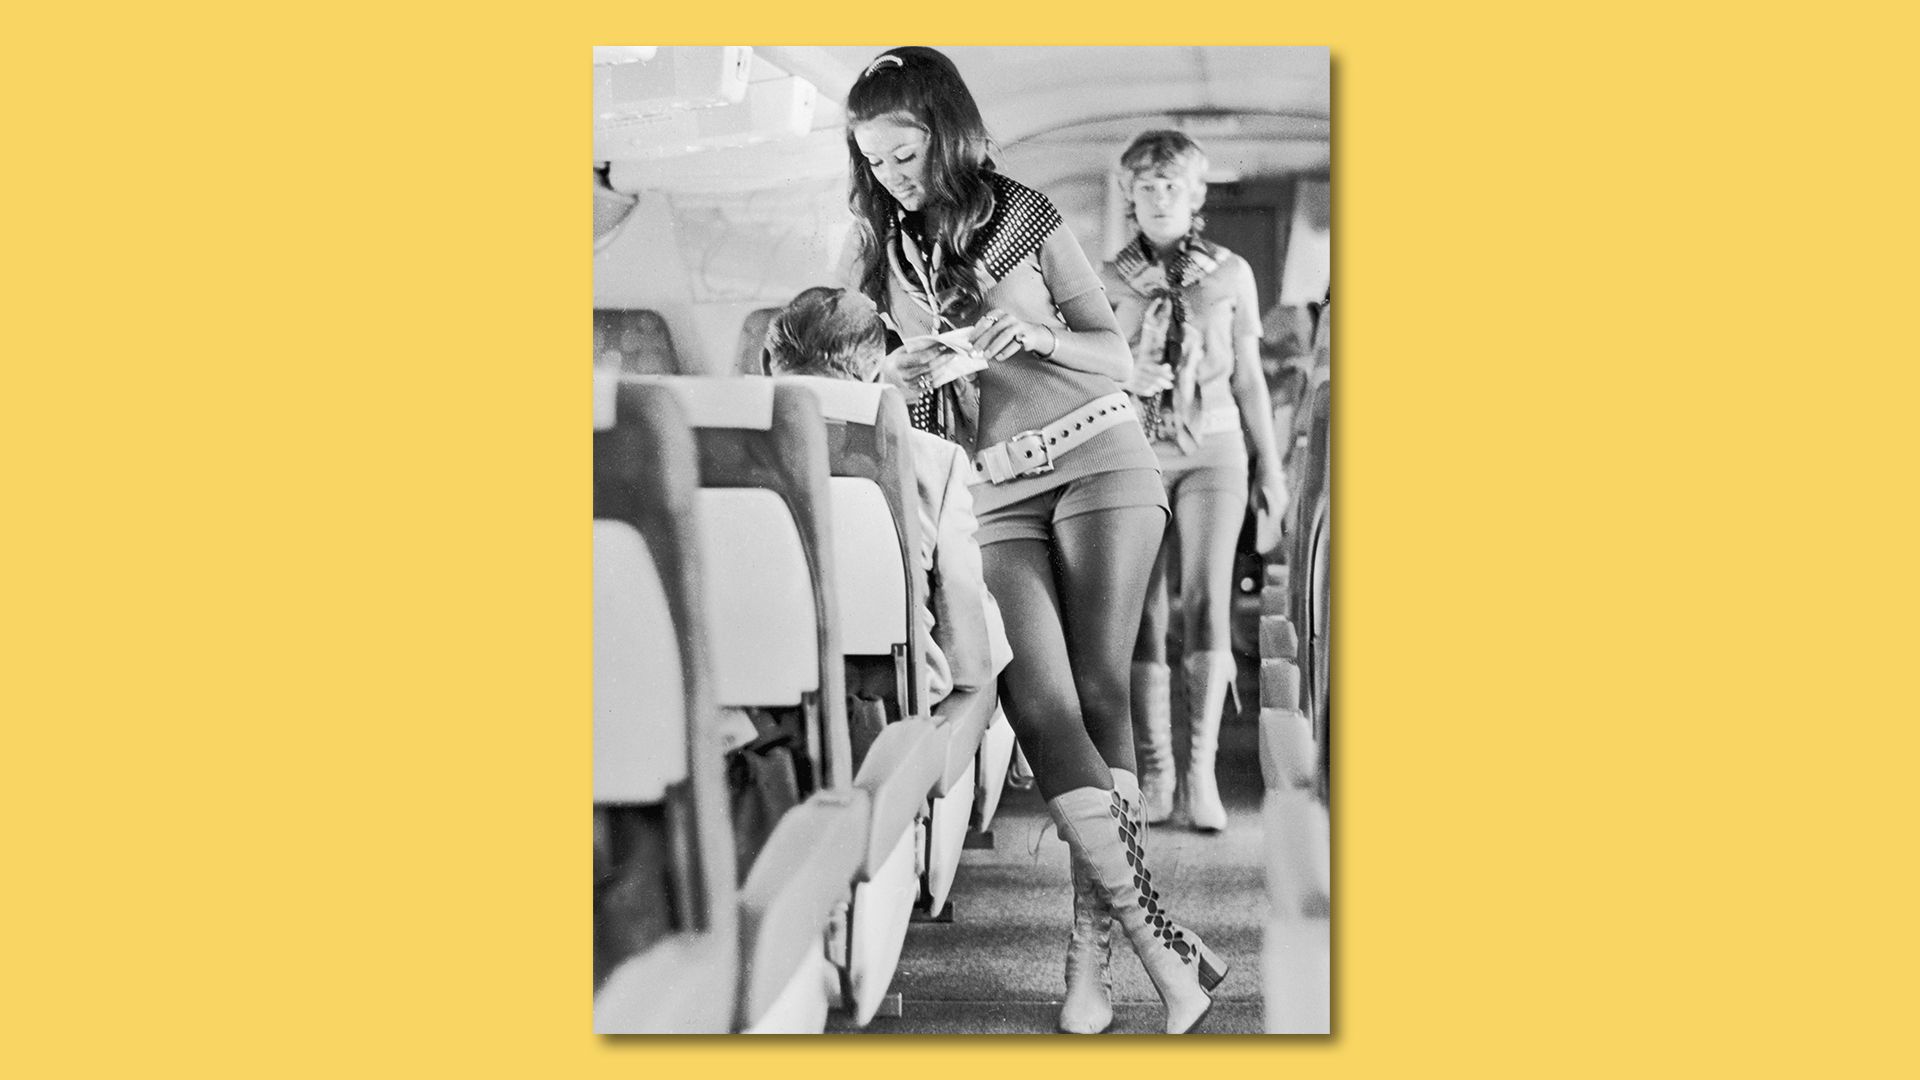 Southwest Airlines flight attendants in hot pants in the 1970s